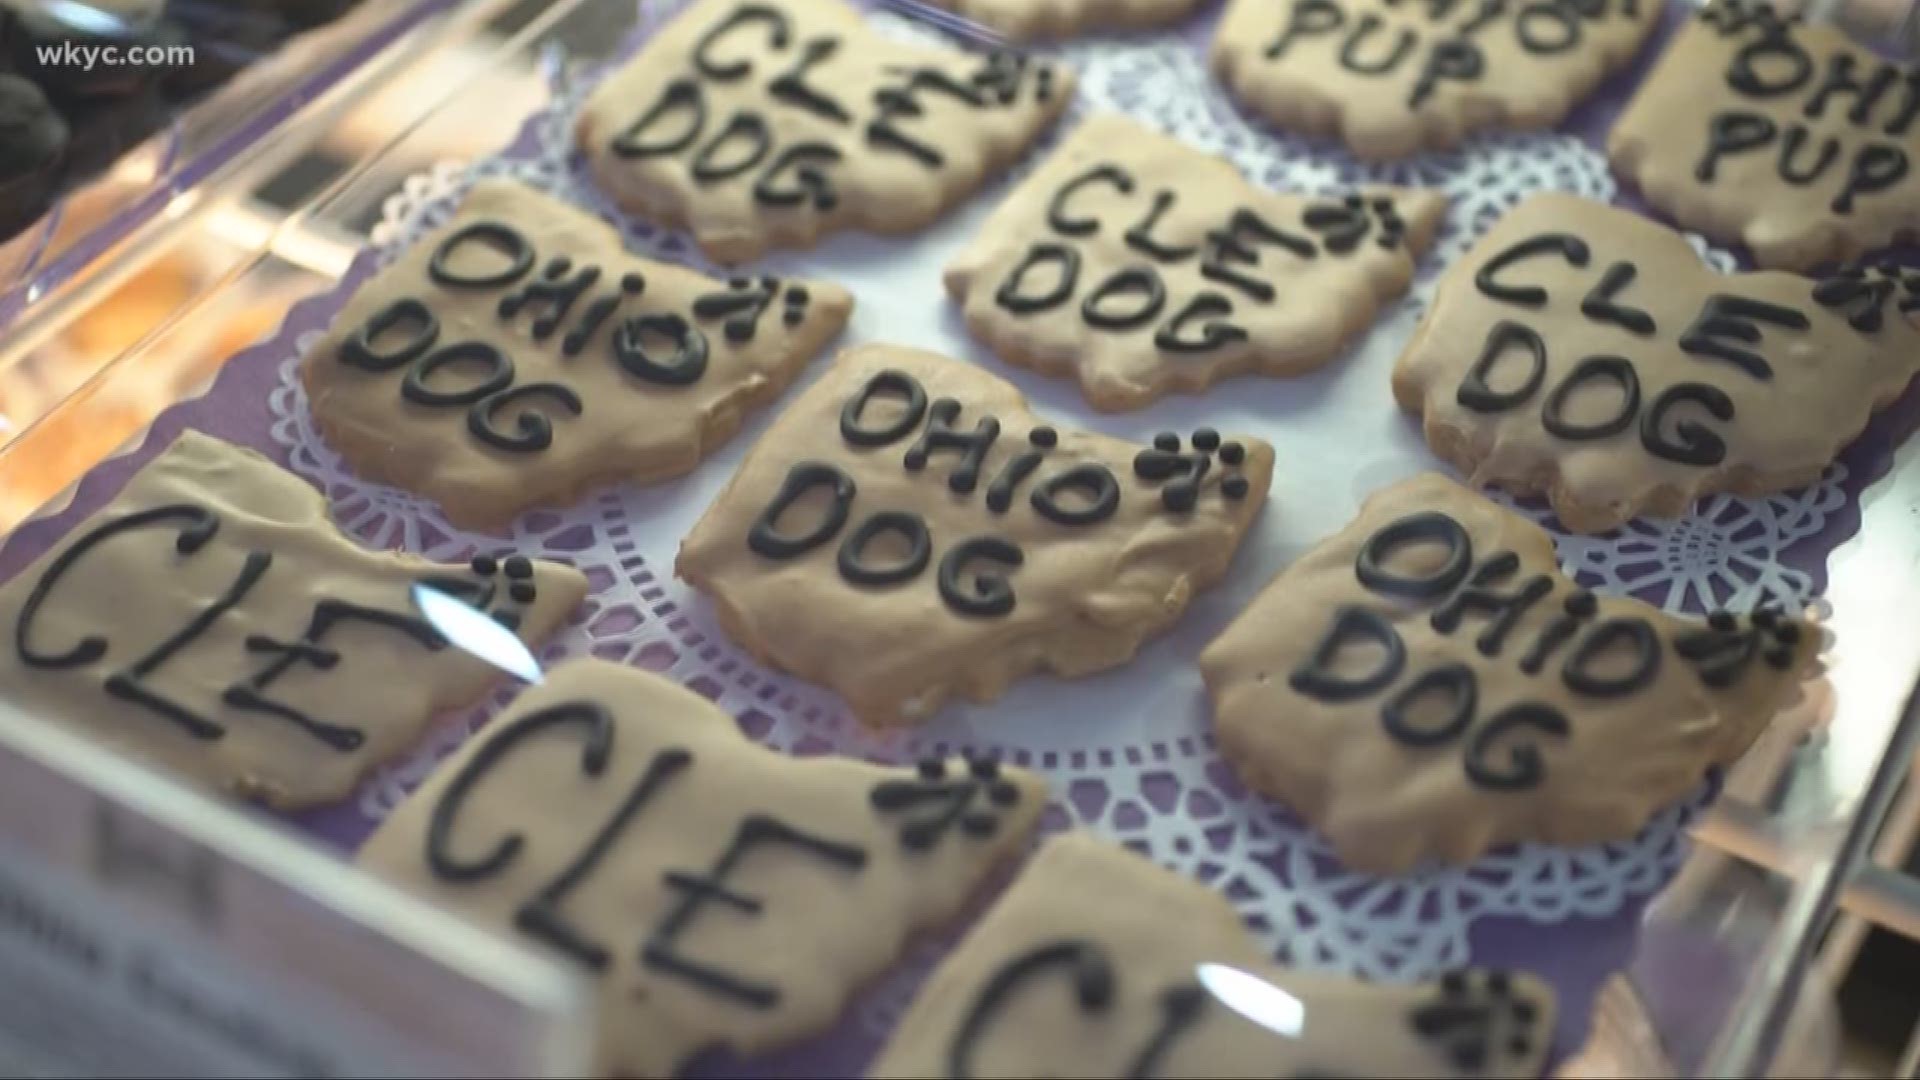 Jan. 11, 2019: If you like to spoil your fur baby, Cleveland's Hingetown neighborhood has a paw-fect new place for you and your pup. Three Dog Bakery is ready to open its doors this weekend and they're celebrating with a grand opening event.